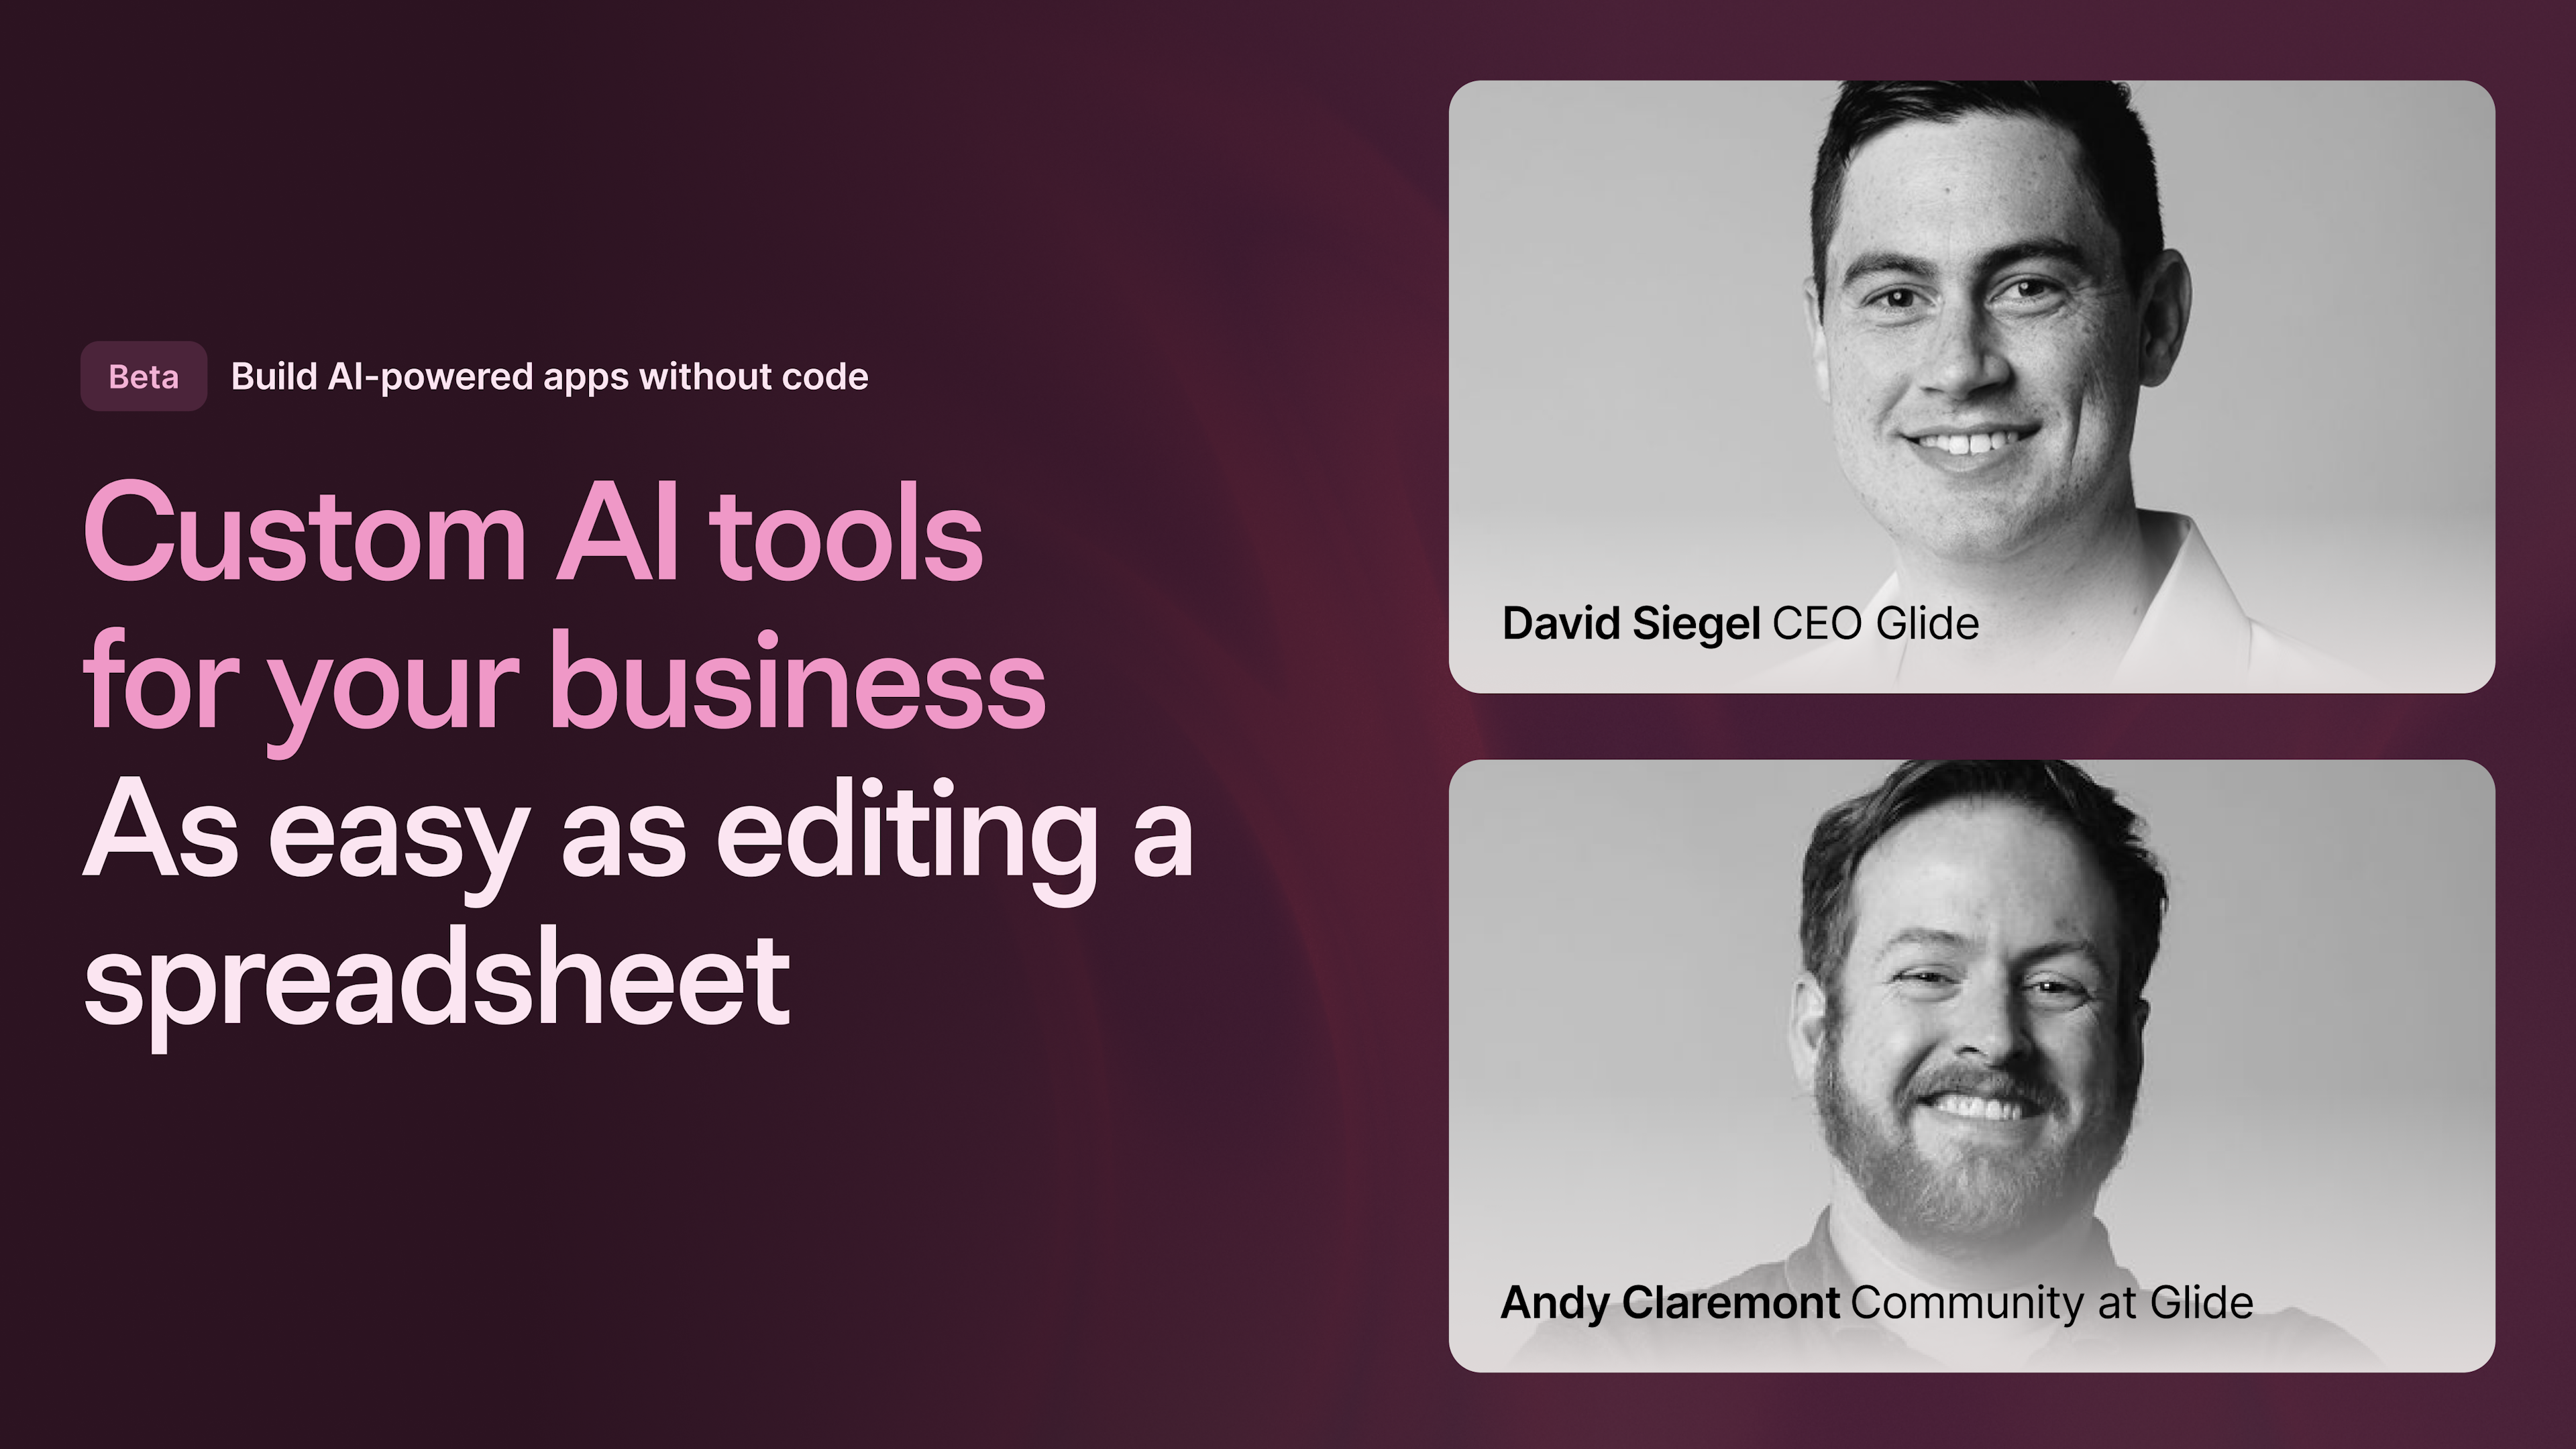 Learn how to build custom AI tools for your business